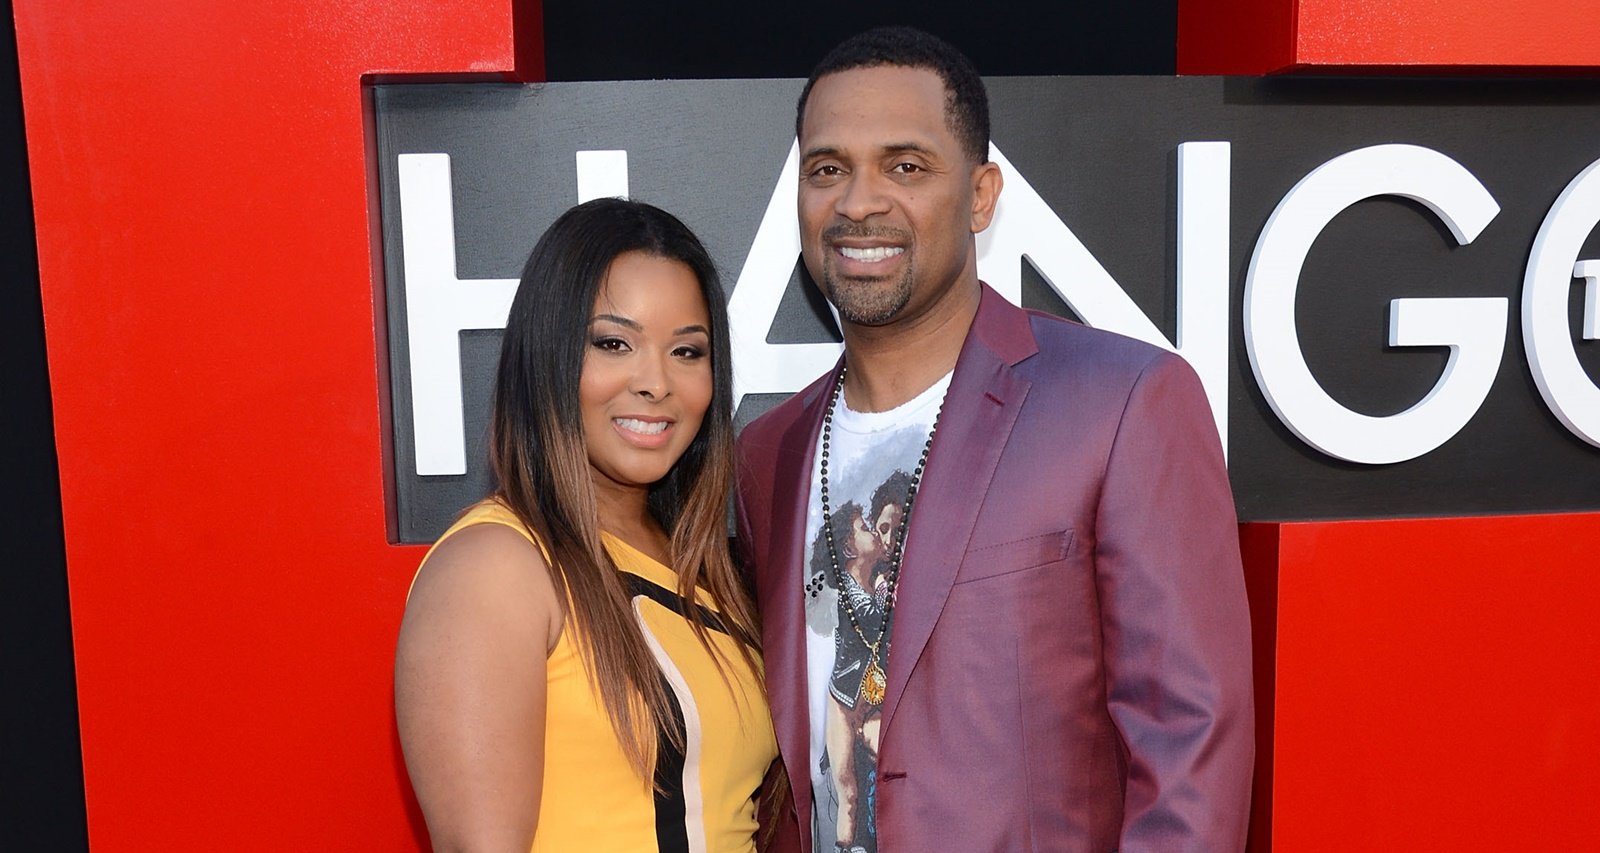 Mechelle McCain Wiki: Facts to Know About Mike Epps’ Ex-Wife